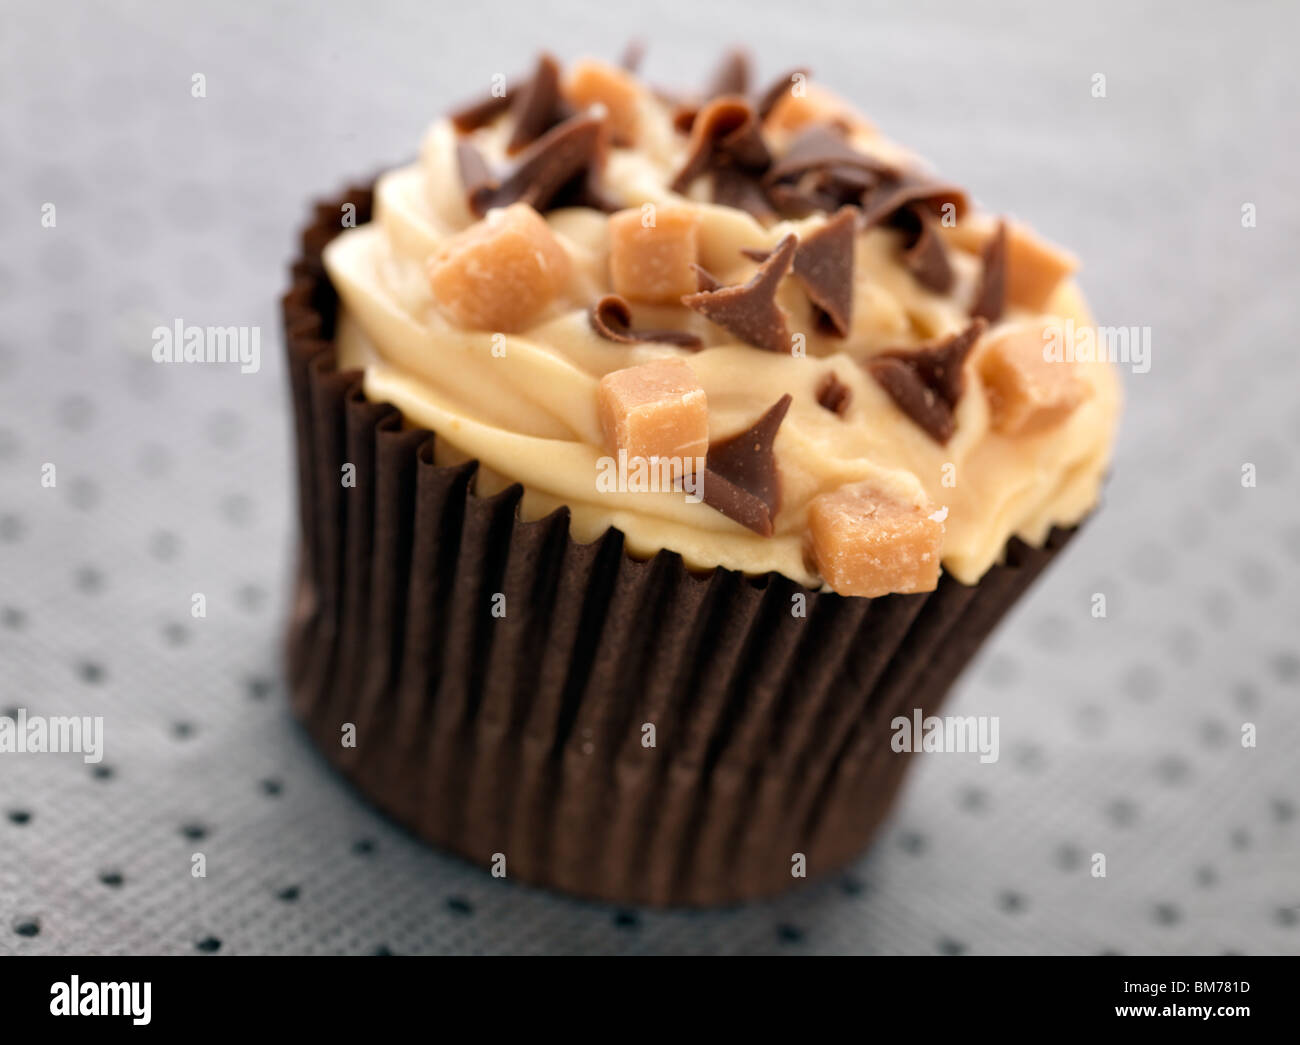 Caramel and toffee cupcake Stock Photo